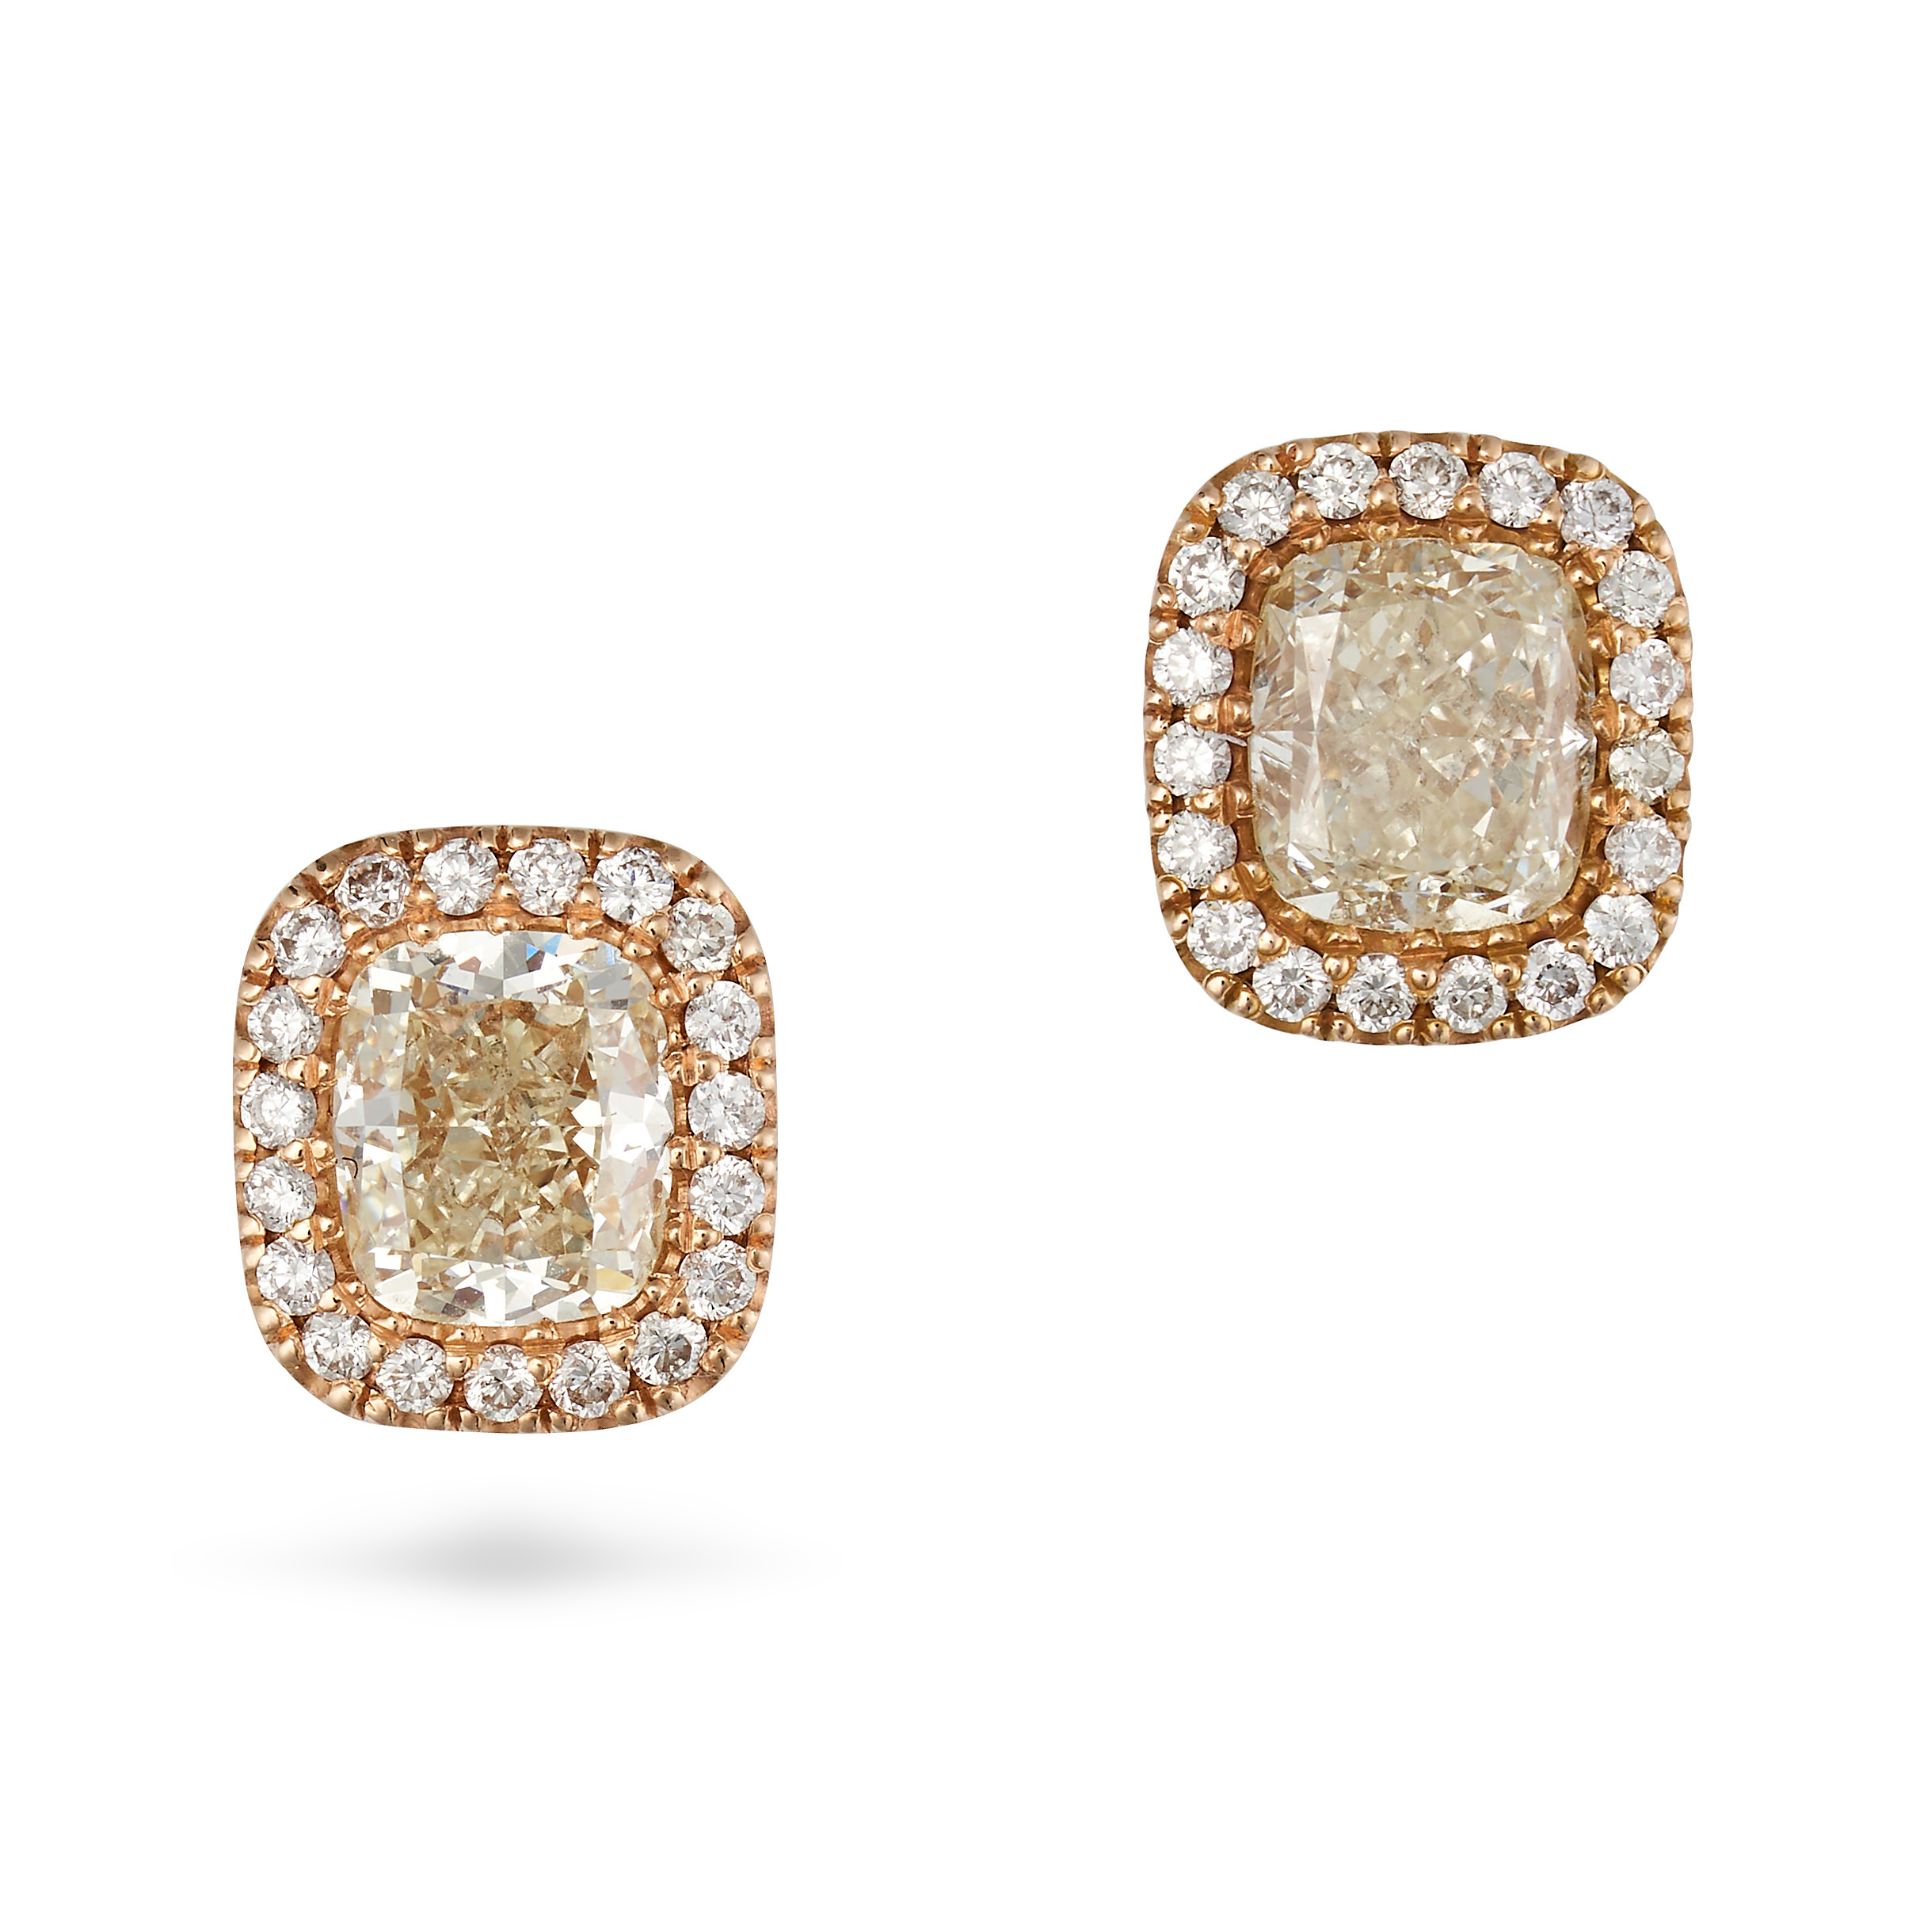 A PAIR OF DIAMOND STUD EARRINGS in 18ct yellow gold, each set with a cushion cut diamond of appro...